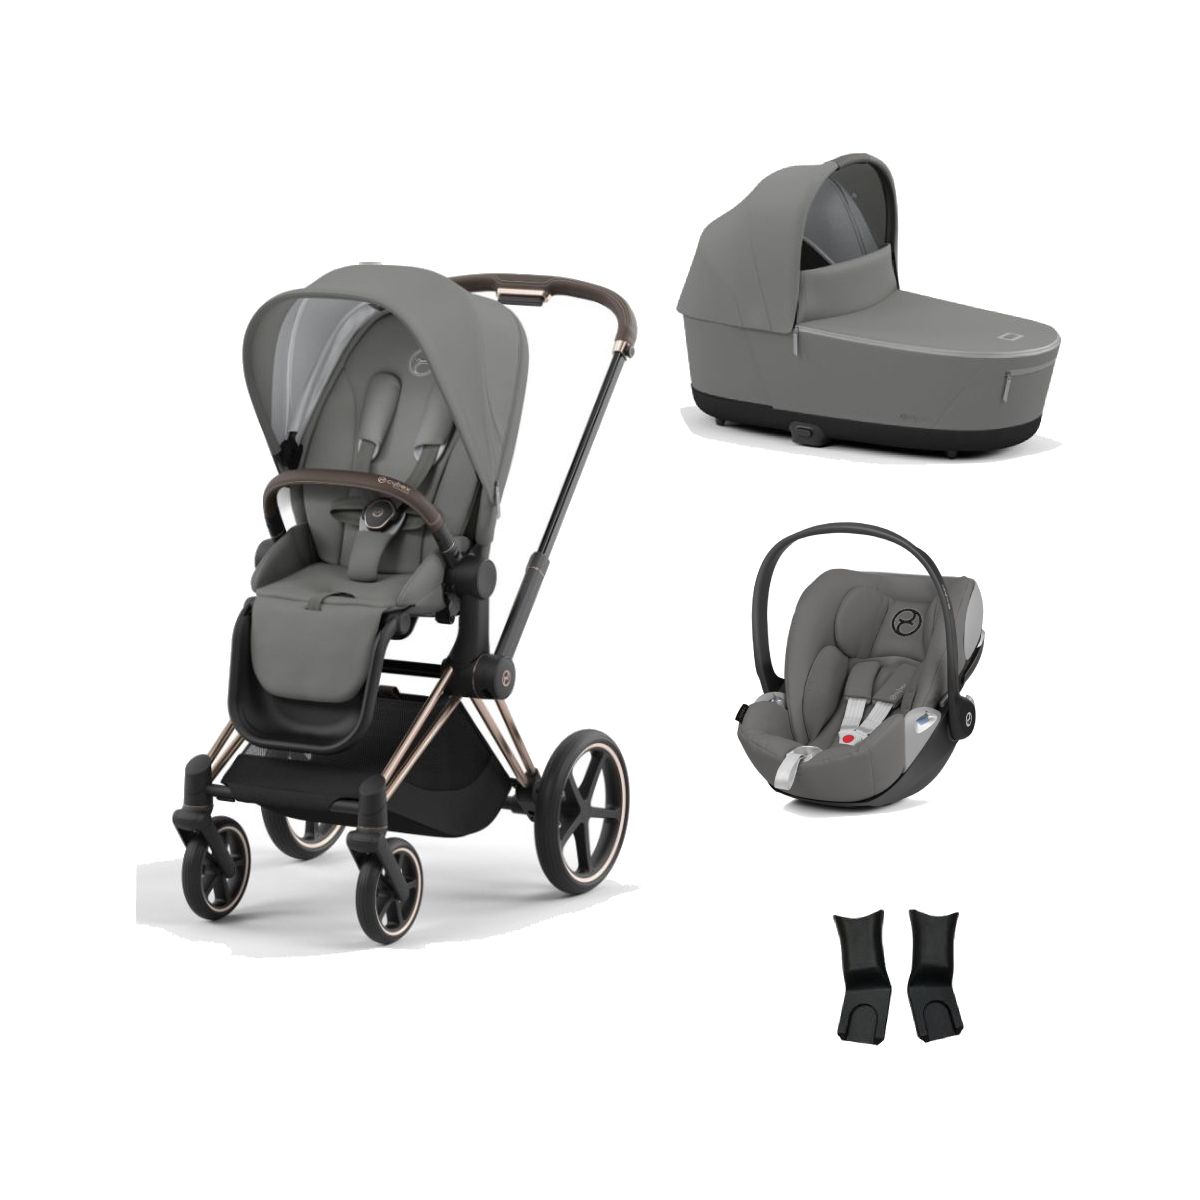 Cybex Priam Rose Gold Pushchair with Lux Carry Cot & Cloud Z Car Seat